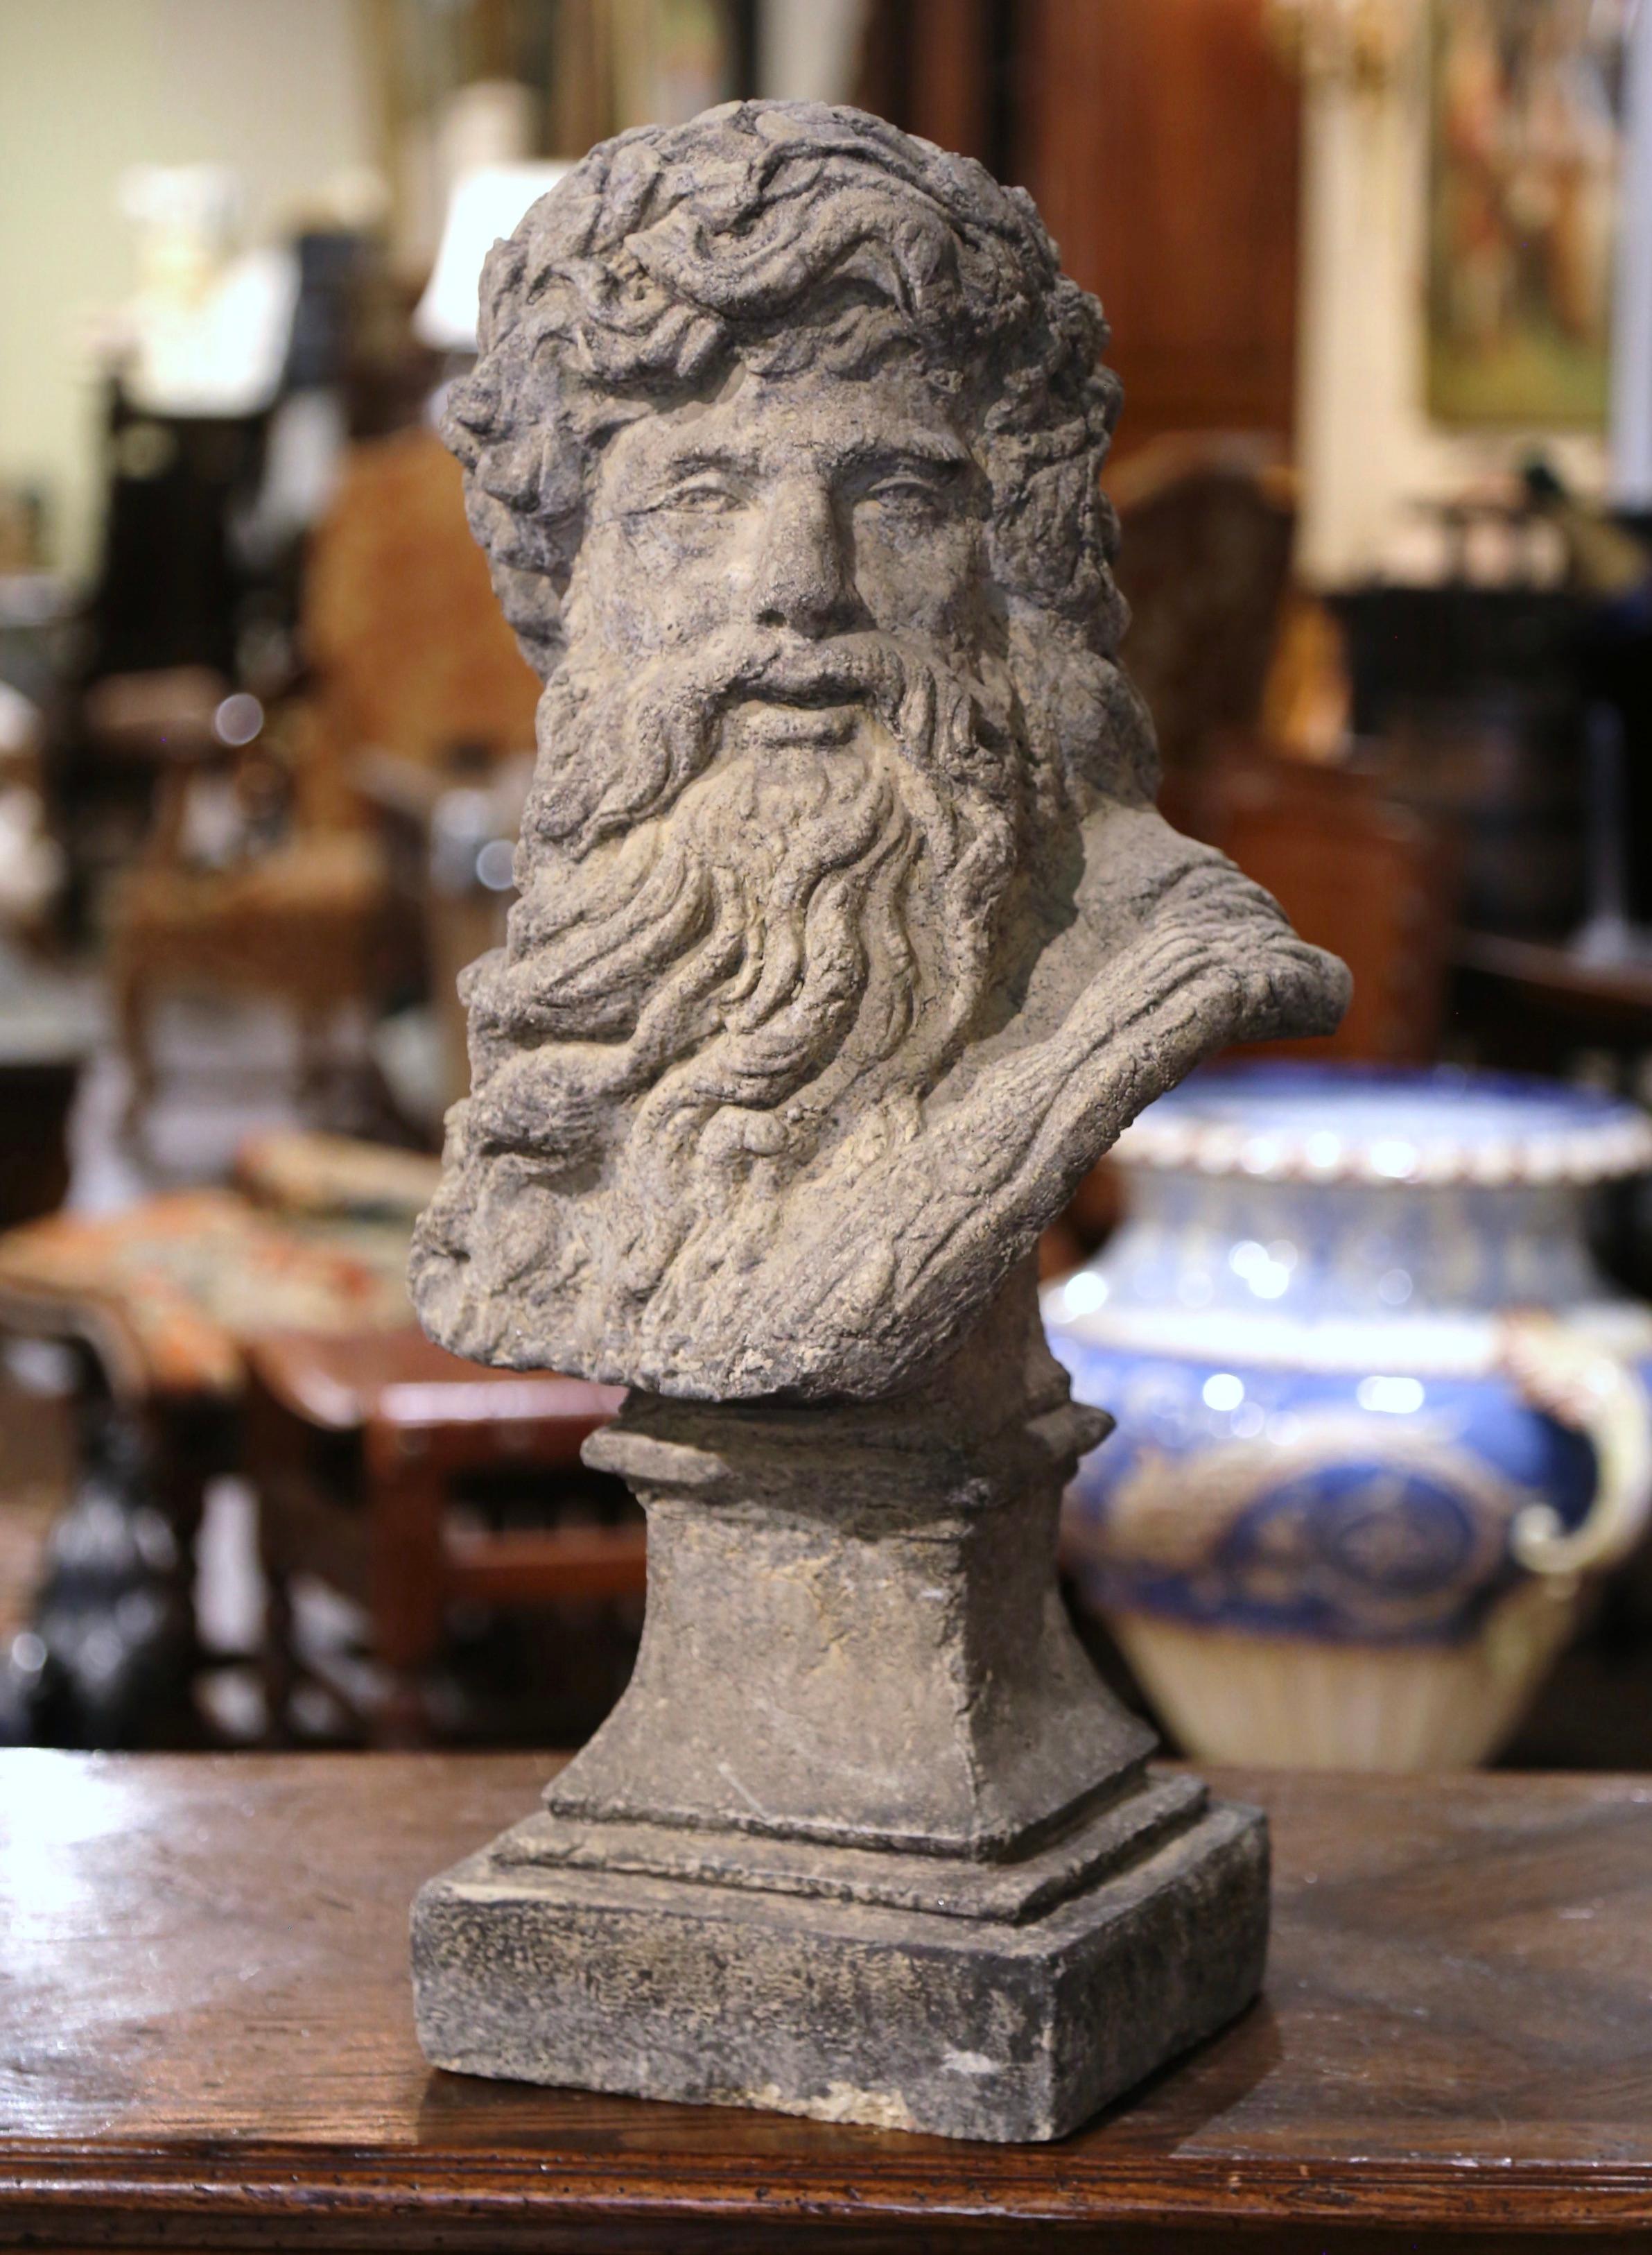 Decorate a garden or patio with this elegant antique outdoor statue of Zeus. Carved of stone in France circa 1970, the large figure depicts the Greek god Zeus, bearded head turned to the side. The tall statuary sculpture is in excellent condition